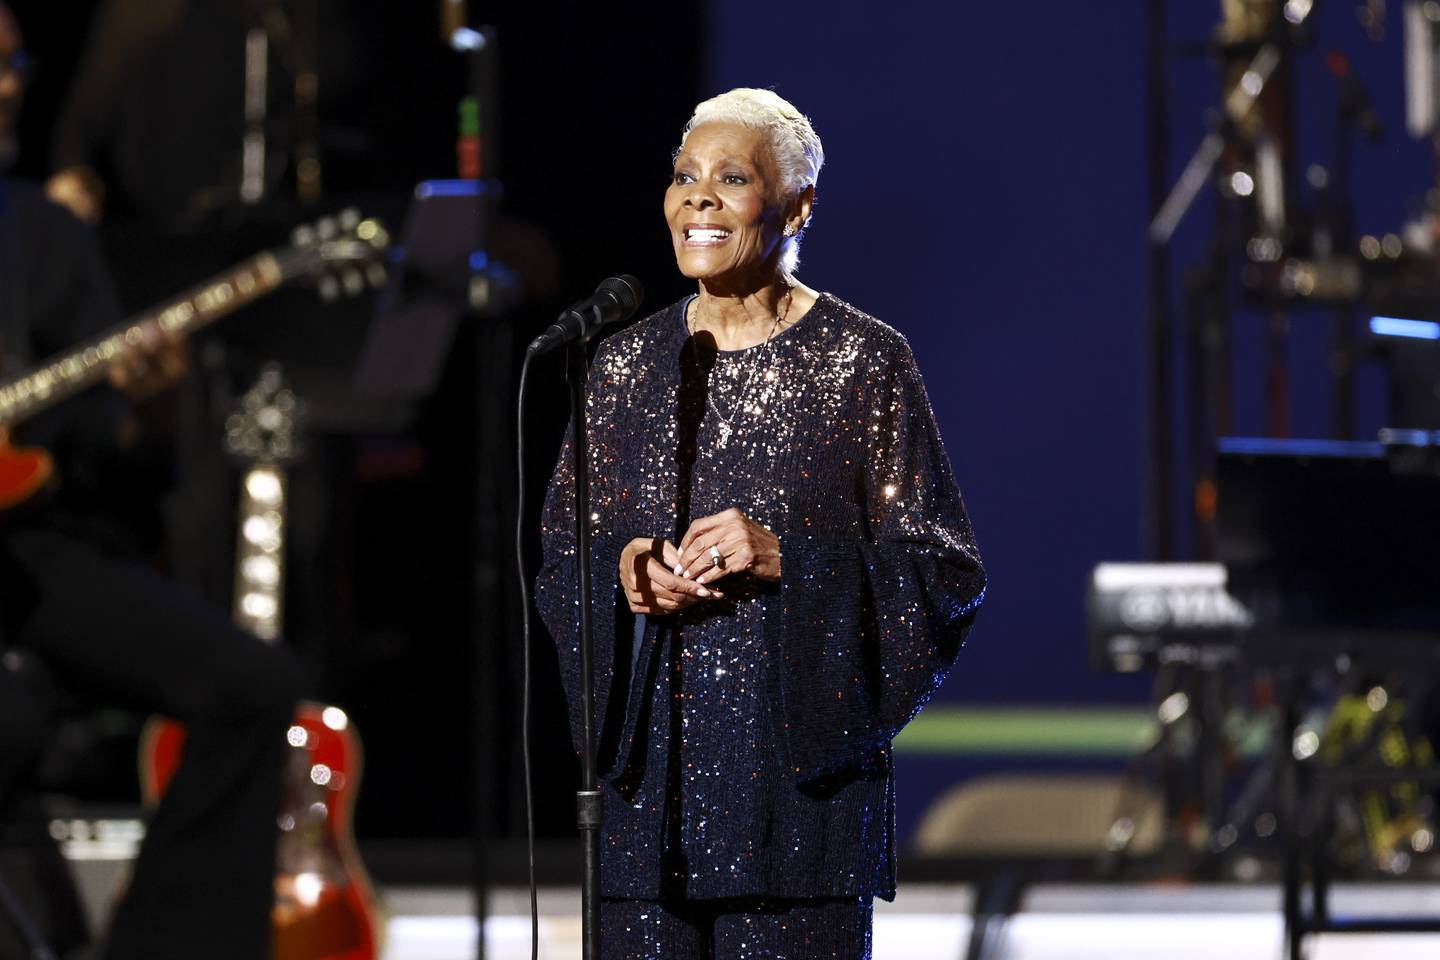 Dionne Warwick speaks onstage during MusiCares Persons of the Year at Los Angeles Convention Center on February 03, 2023 in Los Angeles, California.